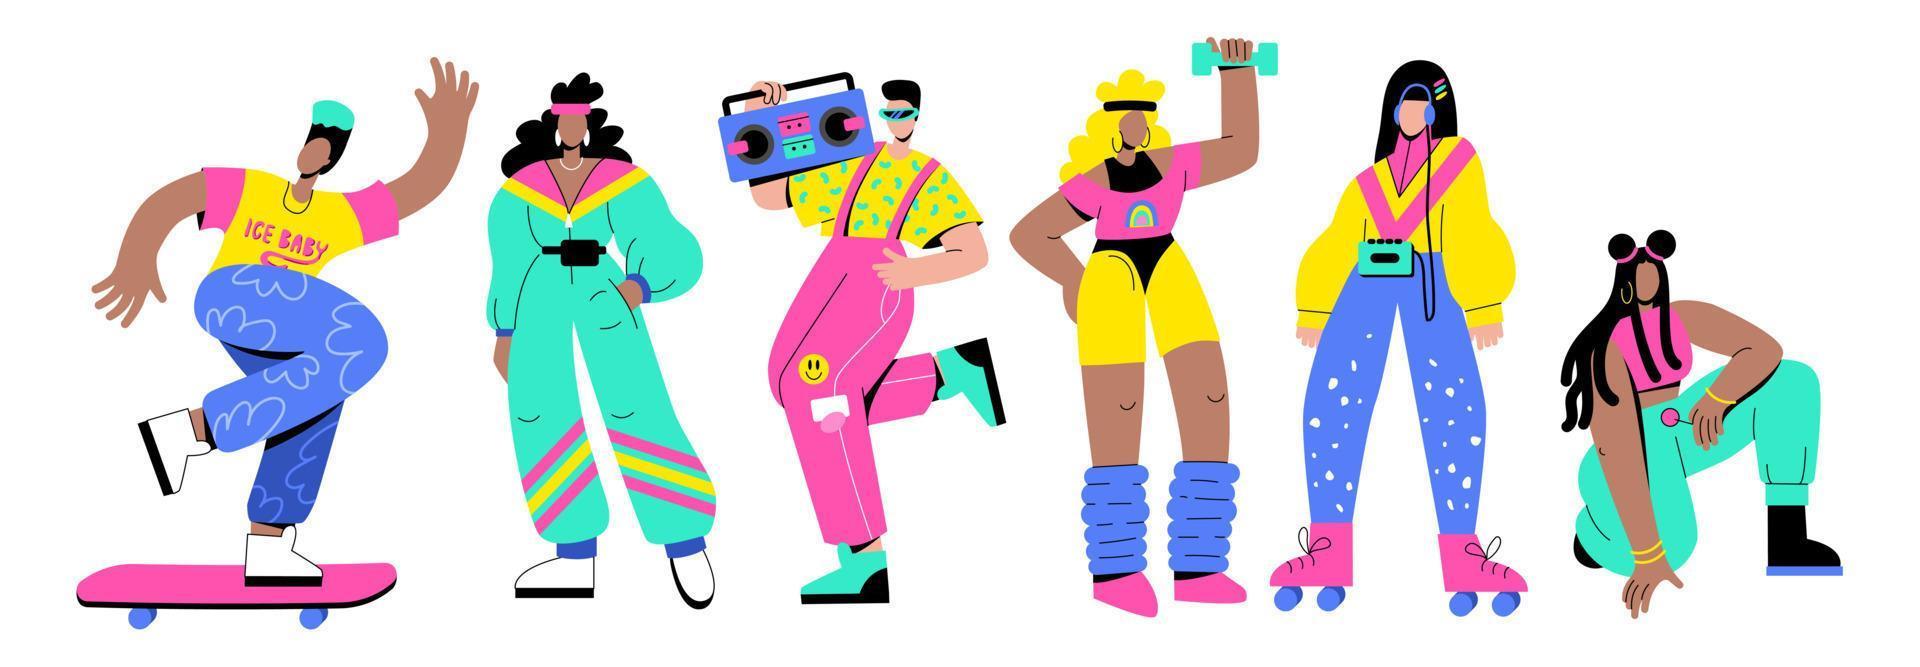 A set of fashionable retro people of the 90s, 80s. Women and men in bright clothes. Retro style party vector